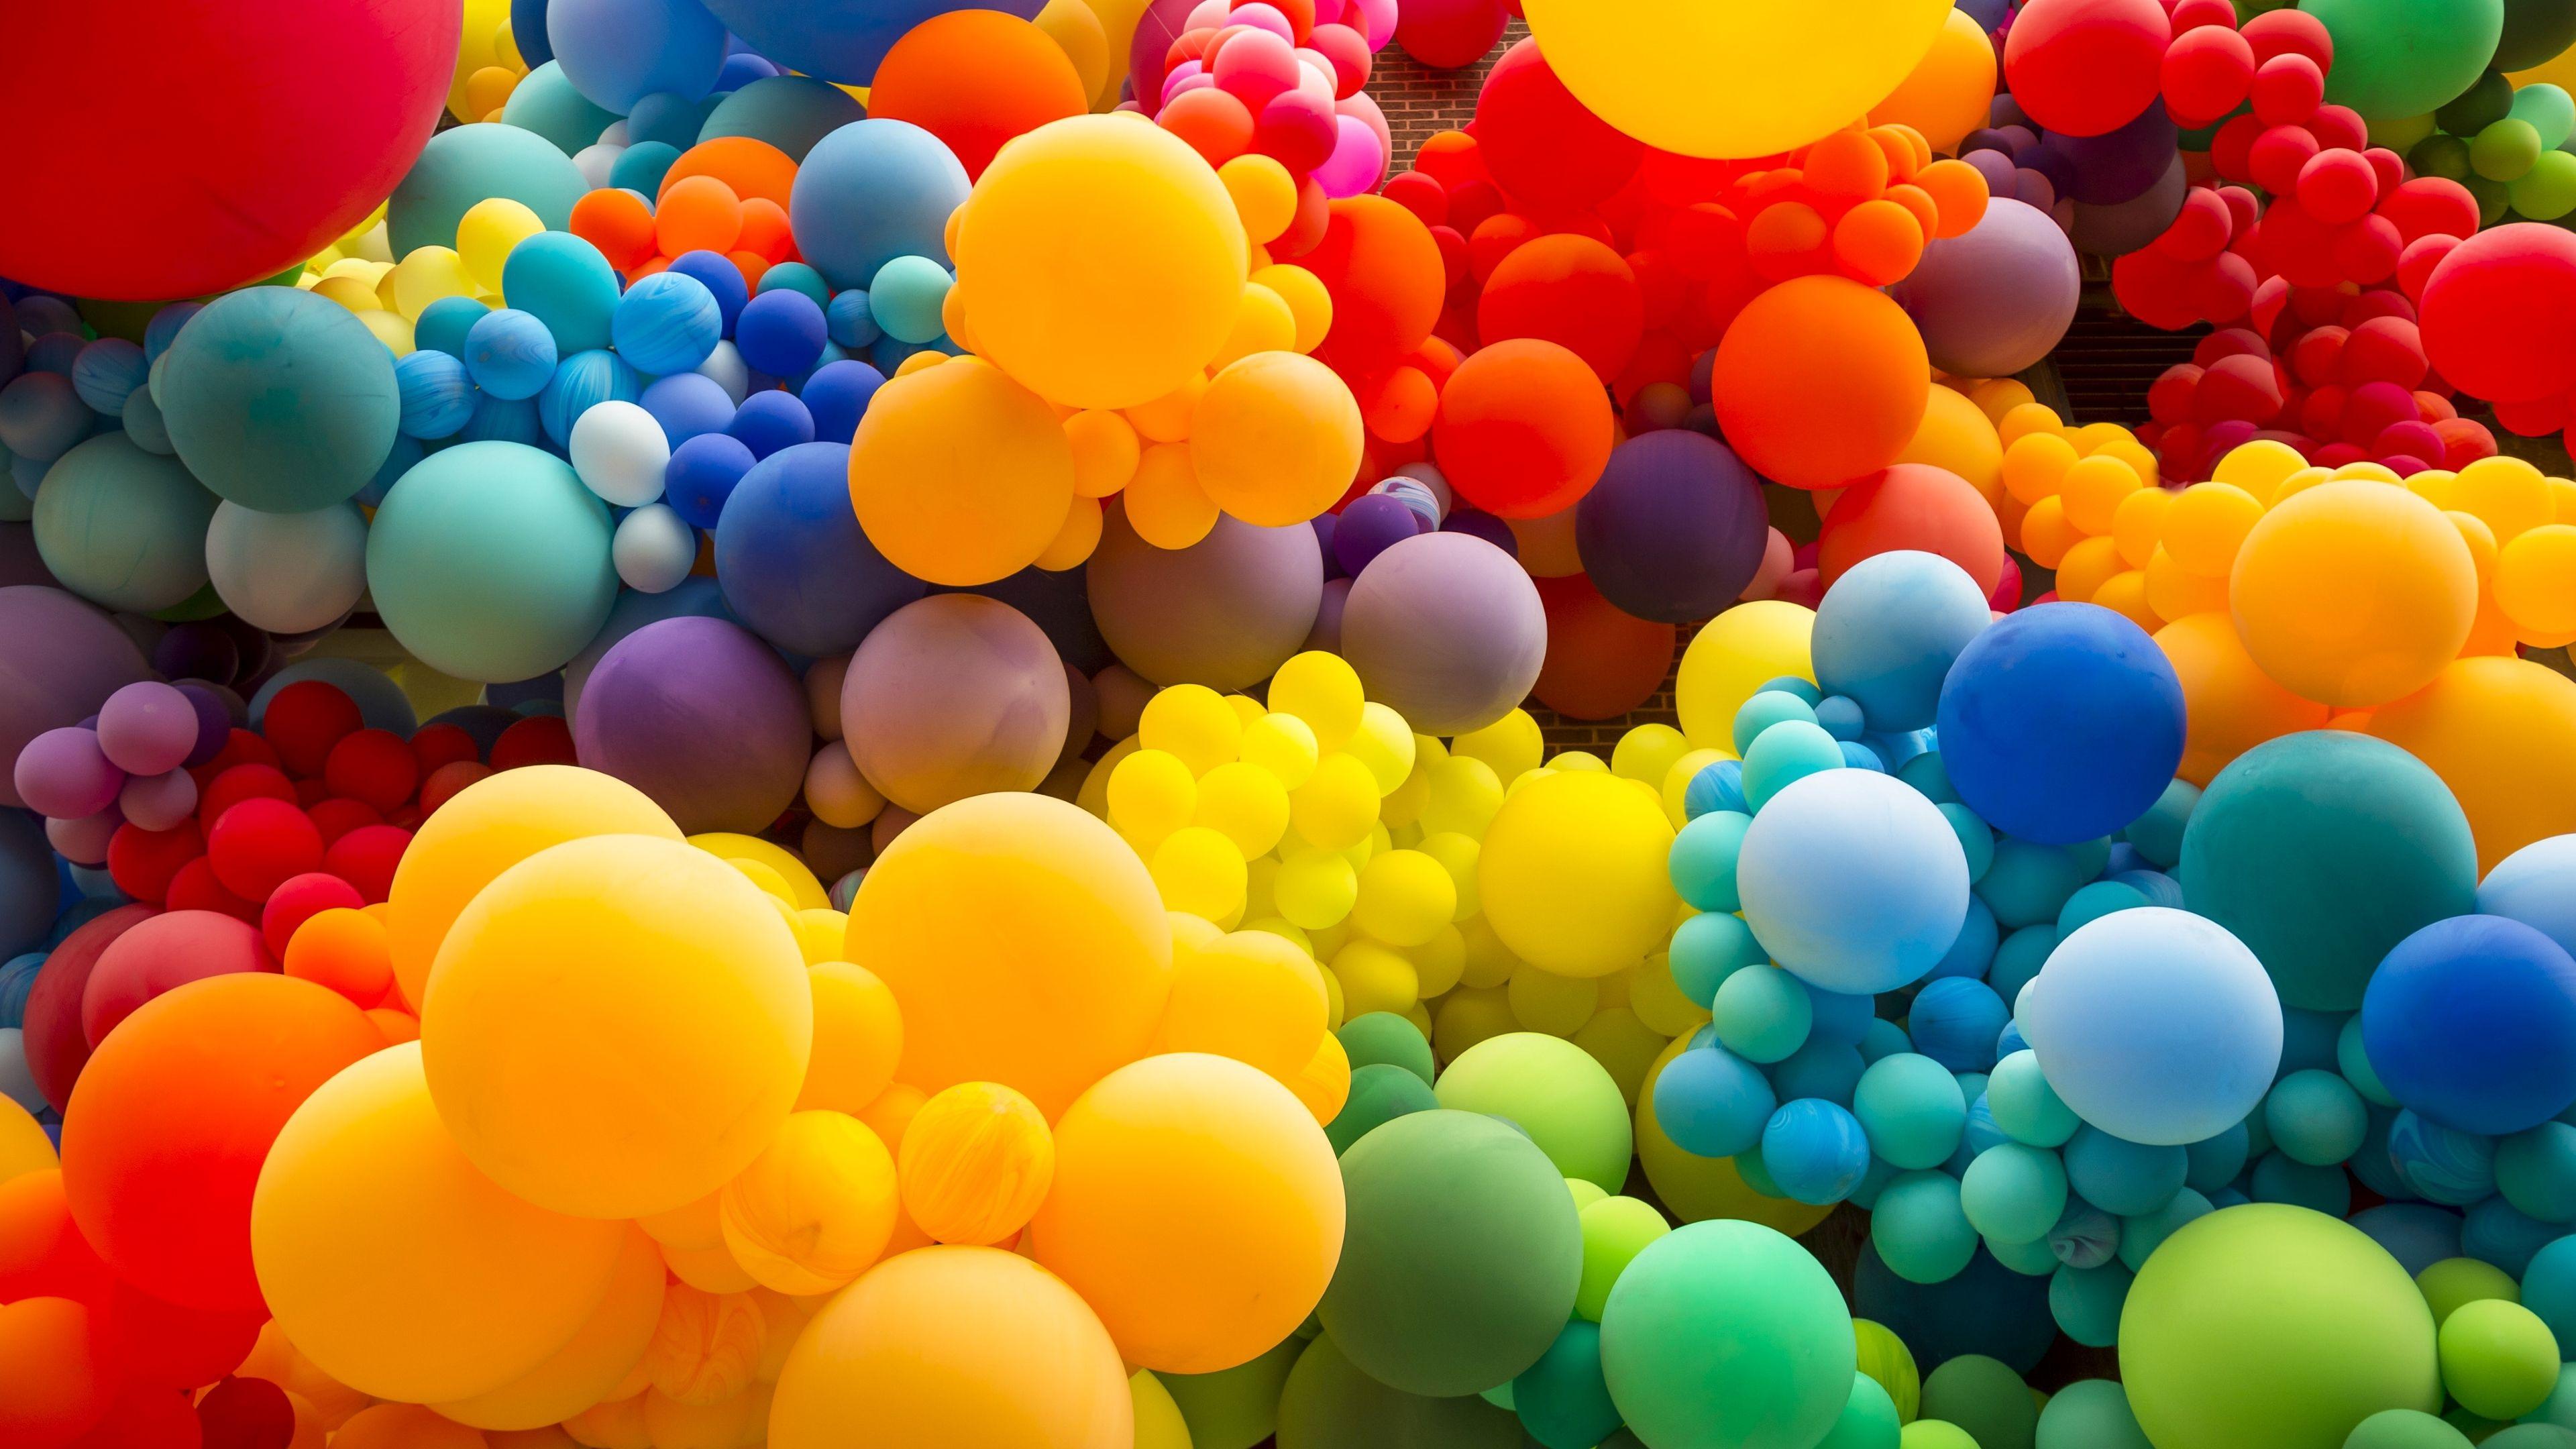 Party Balloons Wallpapers - Top Free Party Balloons Backgrounds